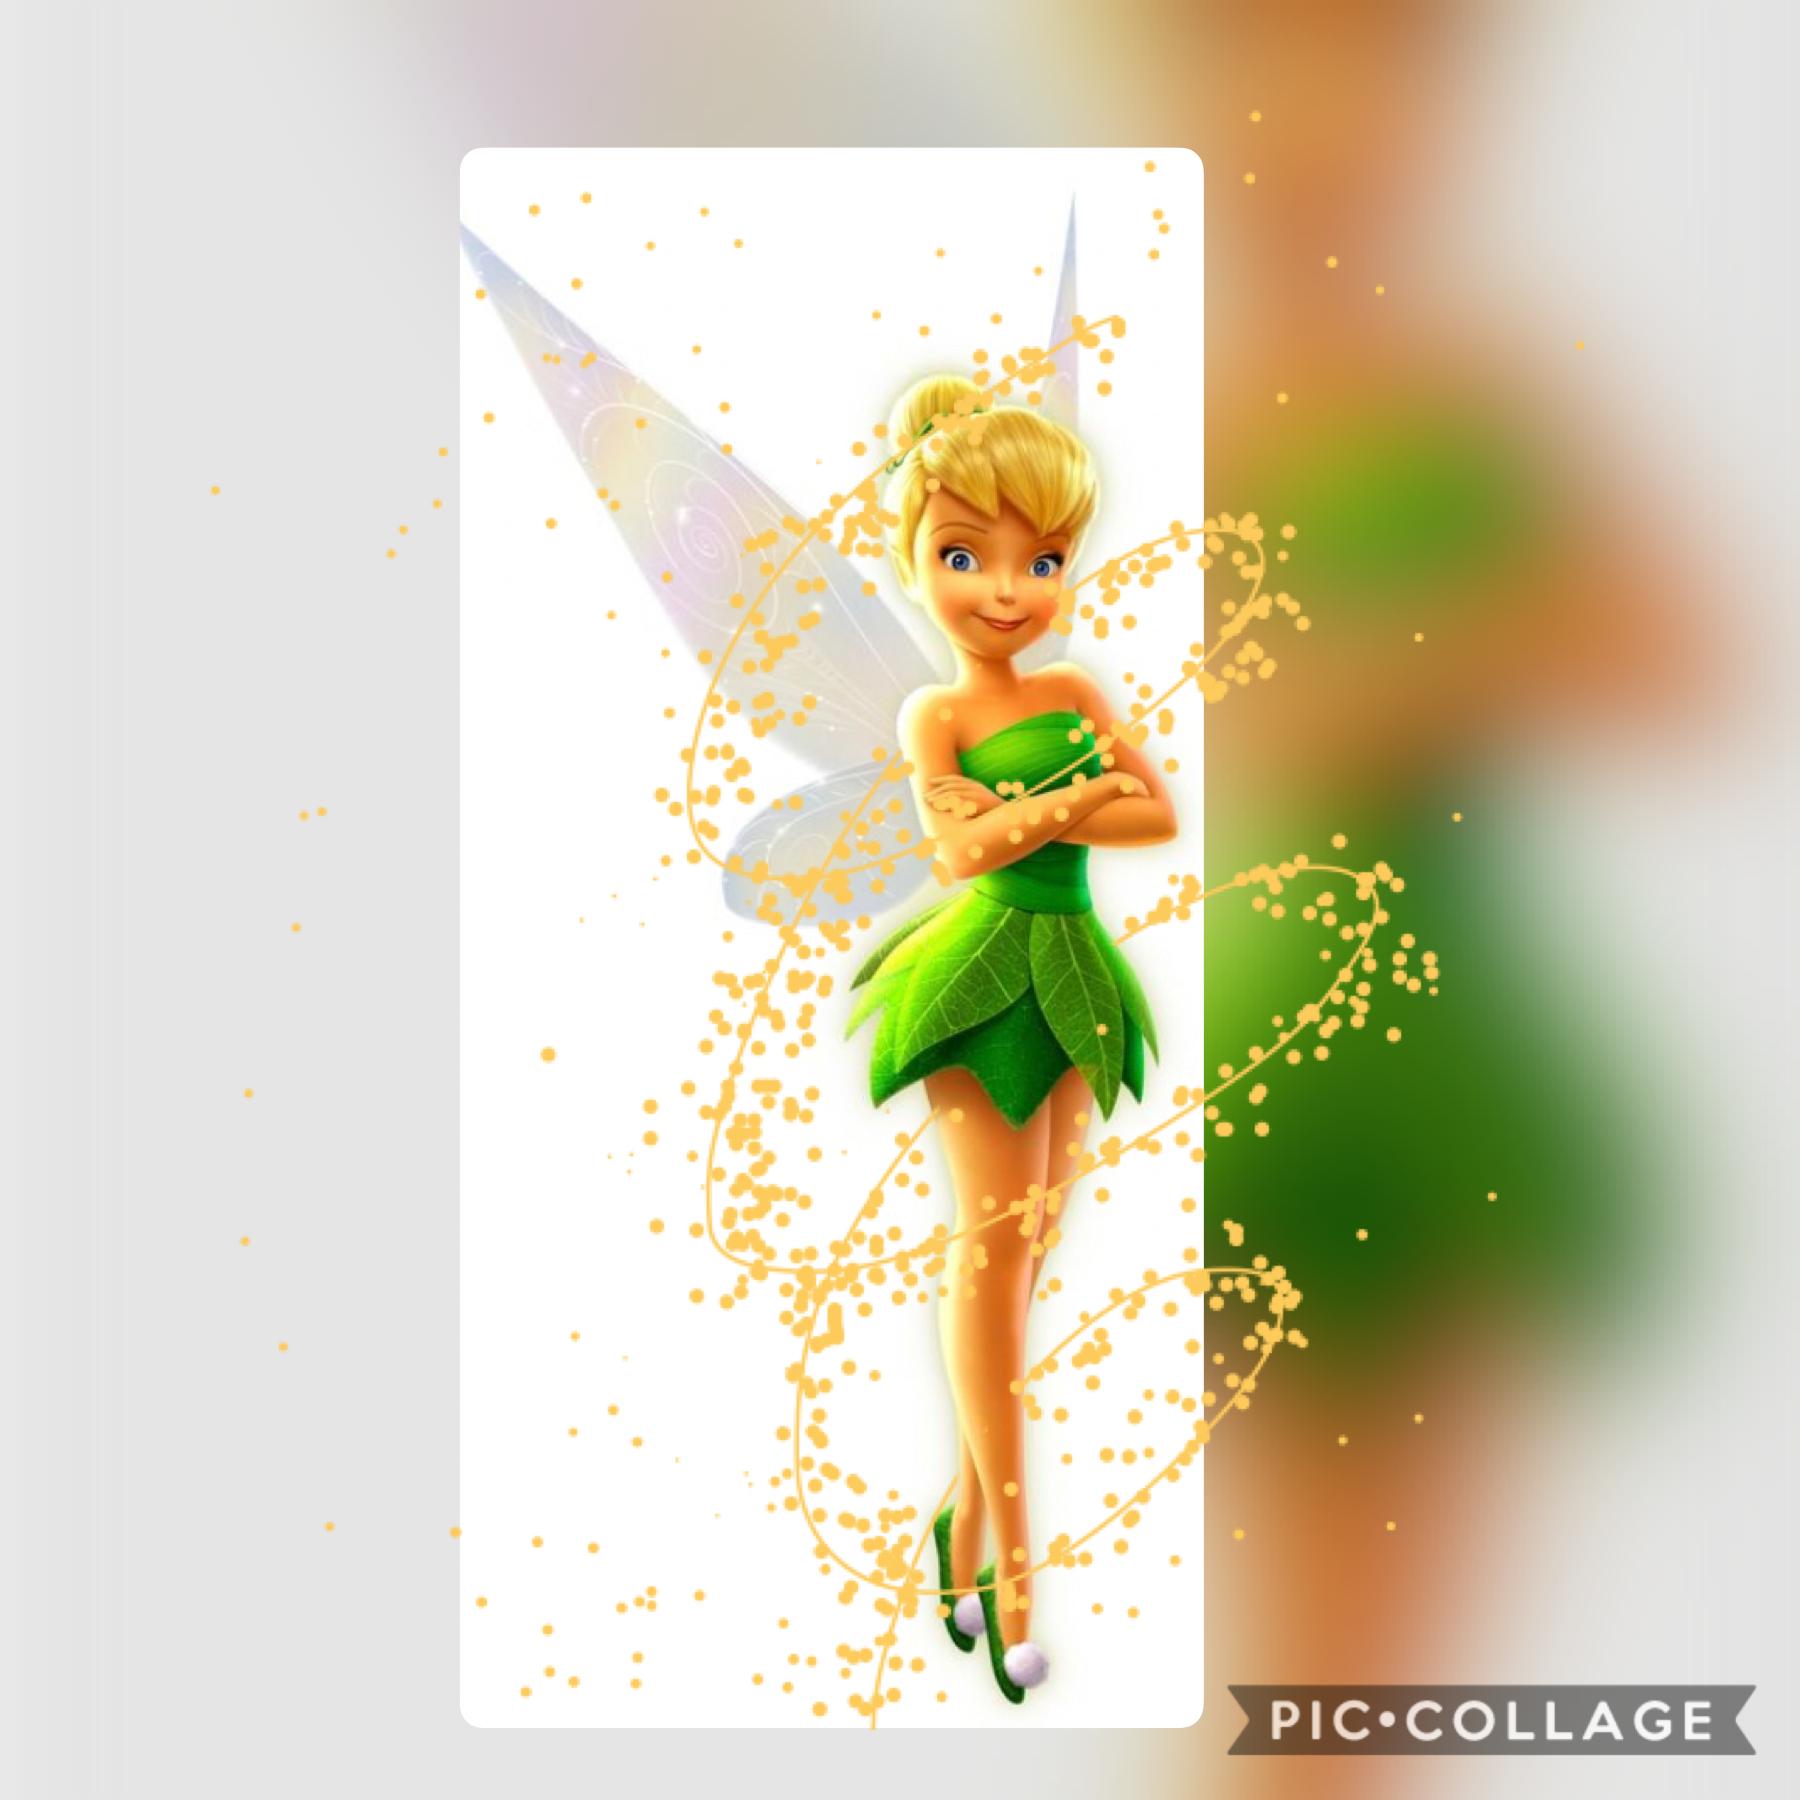 I’m going to be doing a series of my favorite Disney “princesses”. I know tinkerbell isn’t technically a princess but I couldn’t leave her out. Also sorry my editing is a little rusty, I haven’t used this app in a while. 